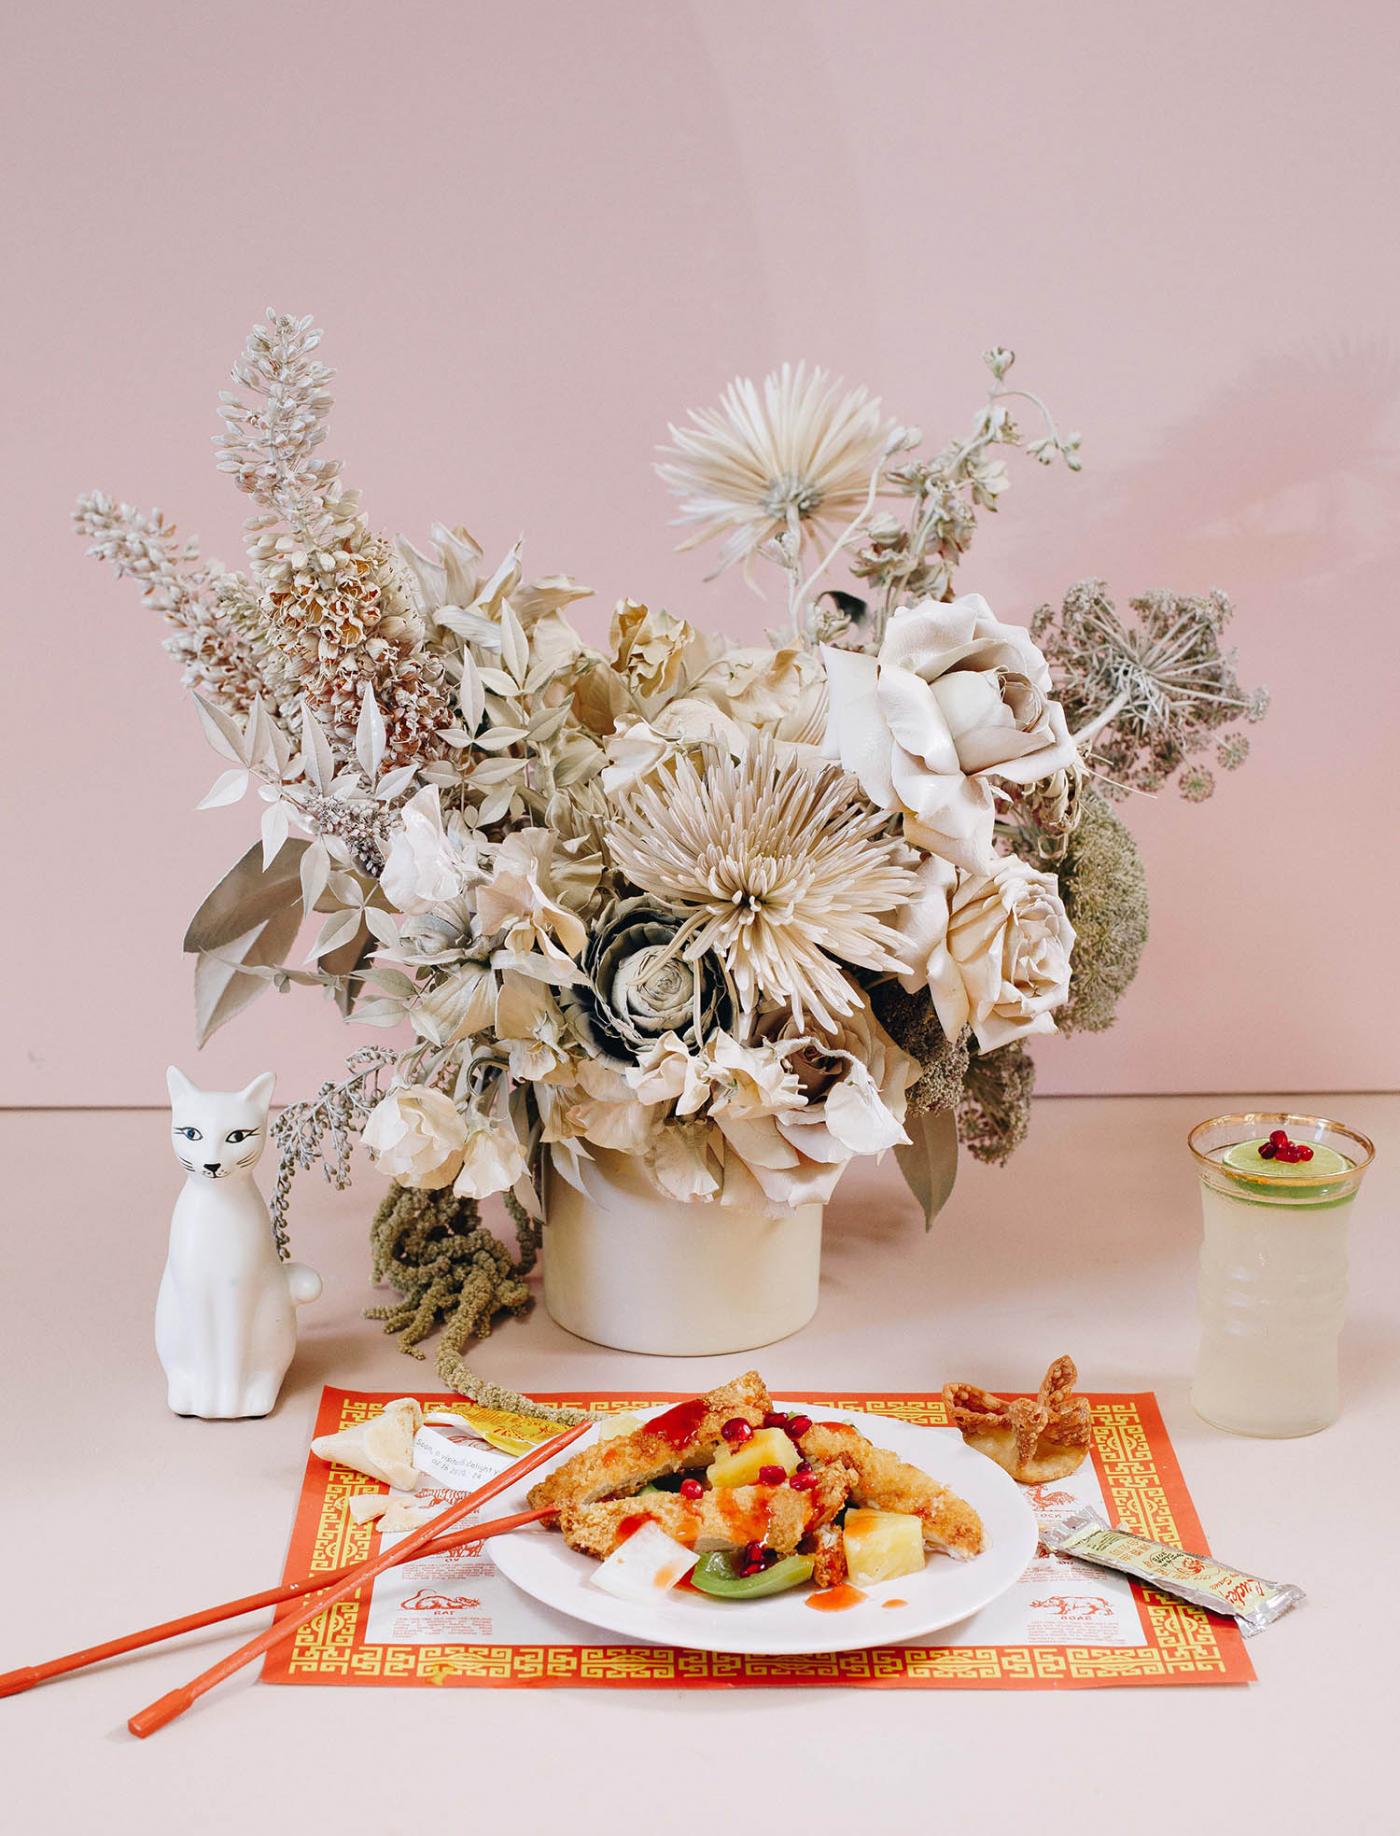 chinese takeout meal in front of neutral florals